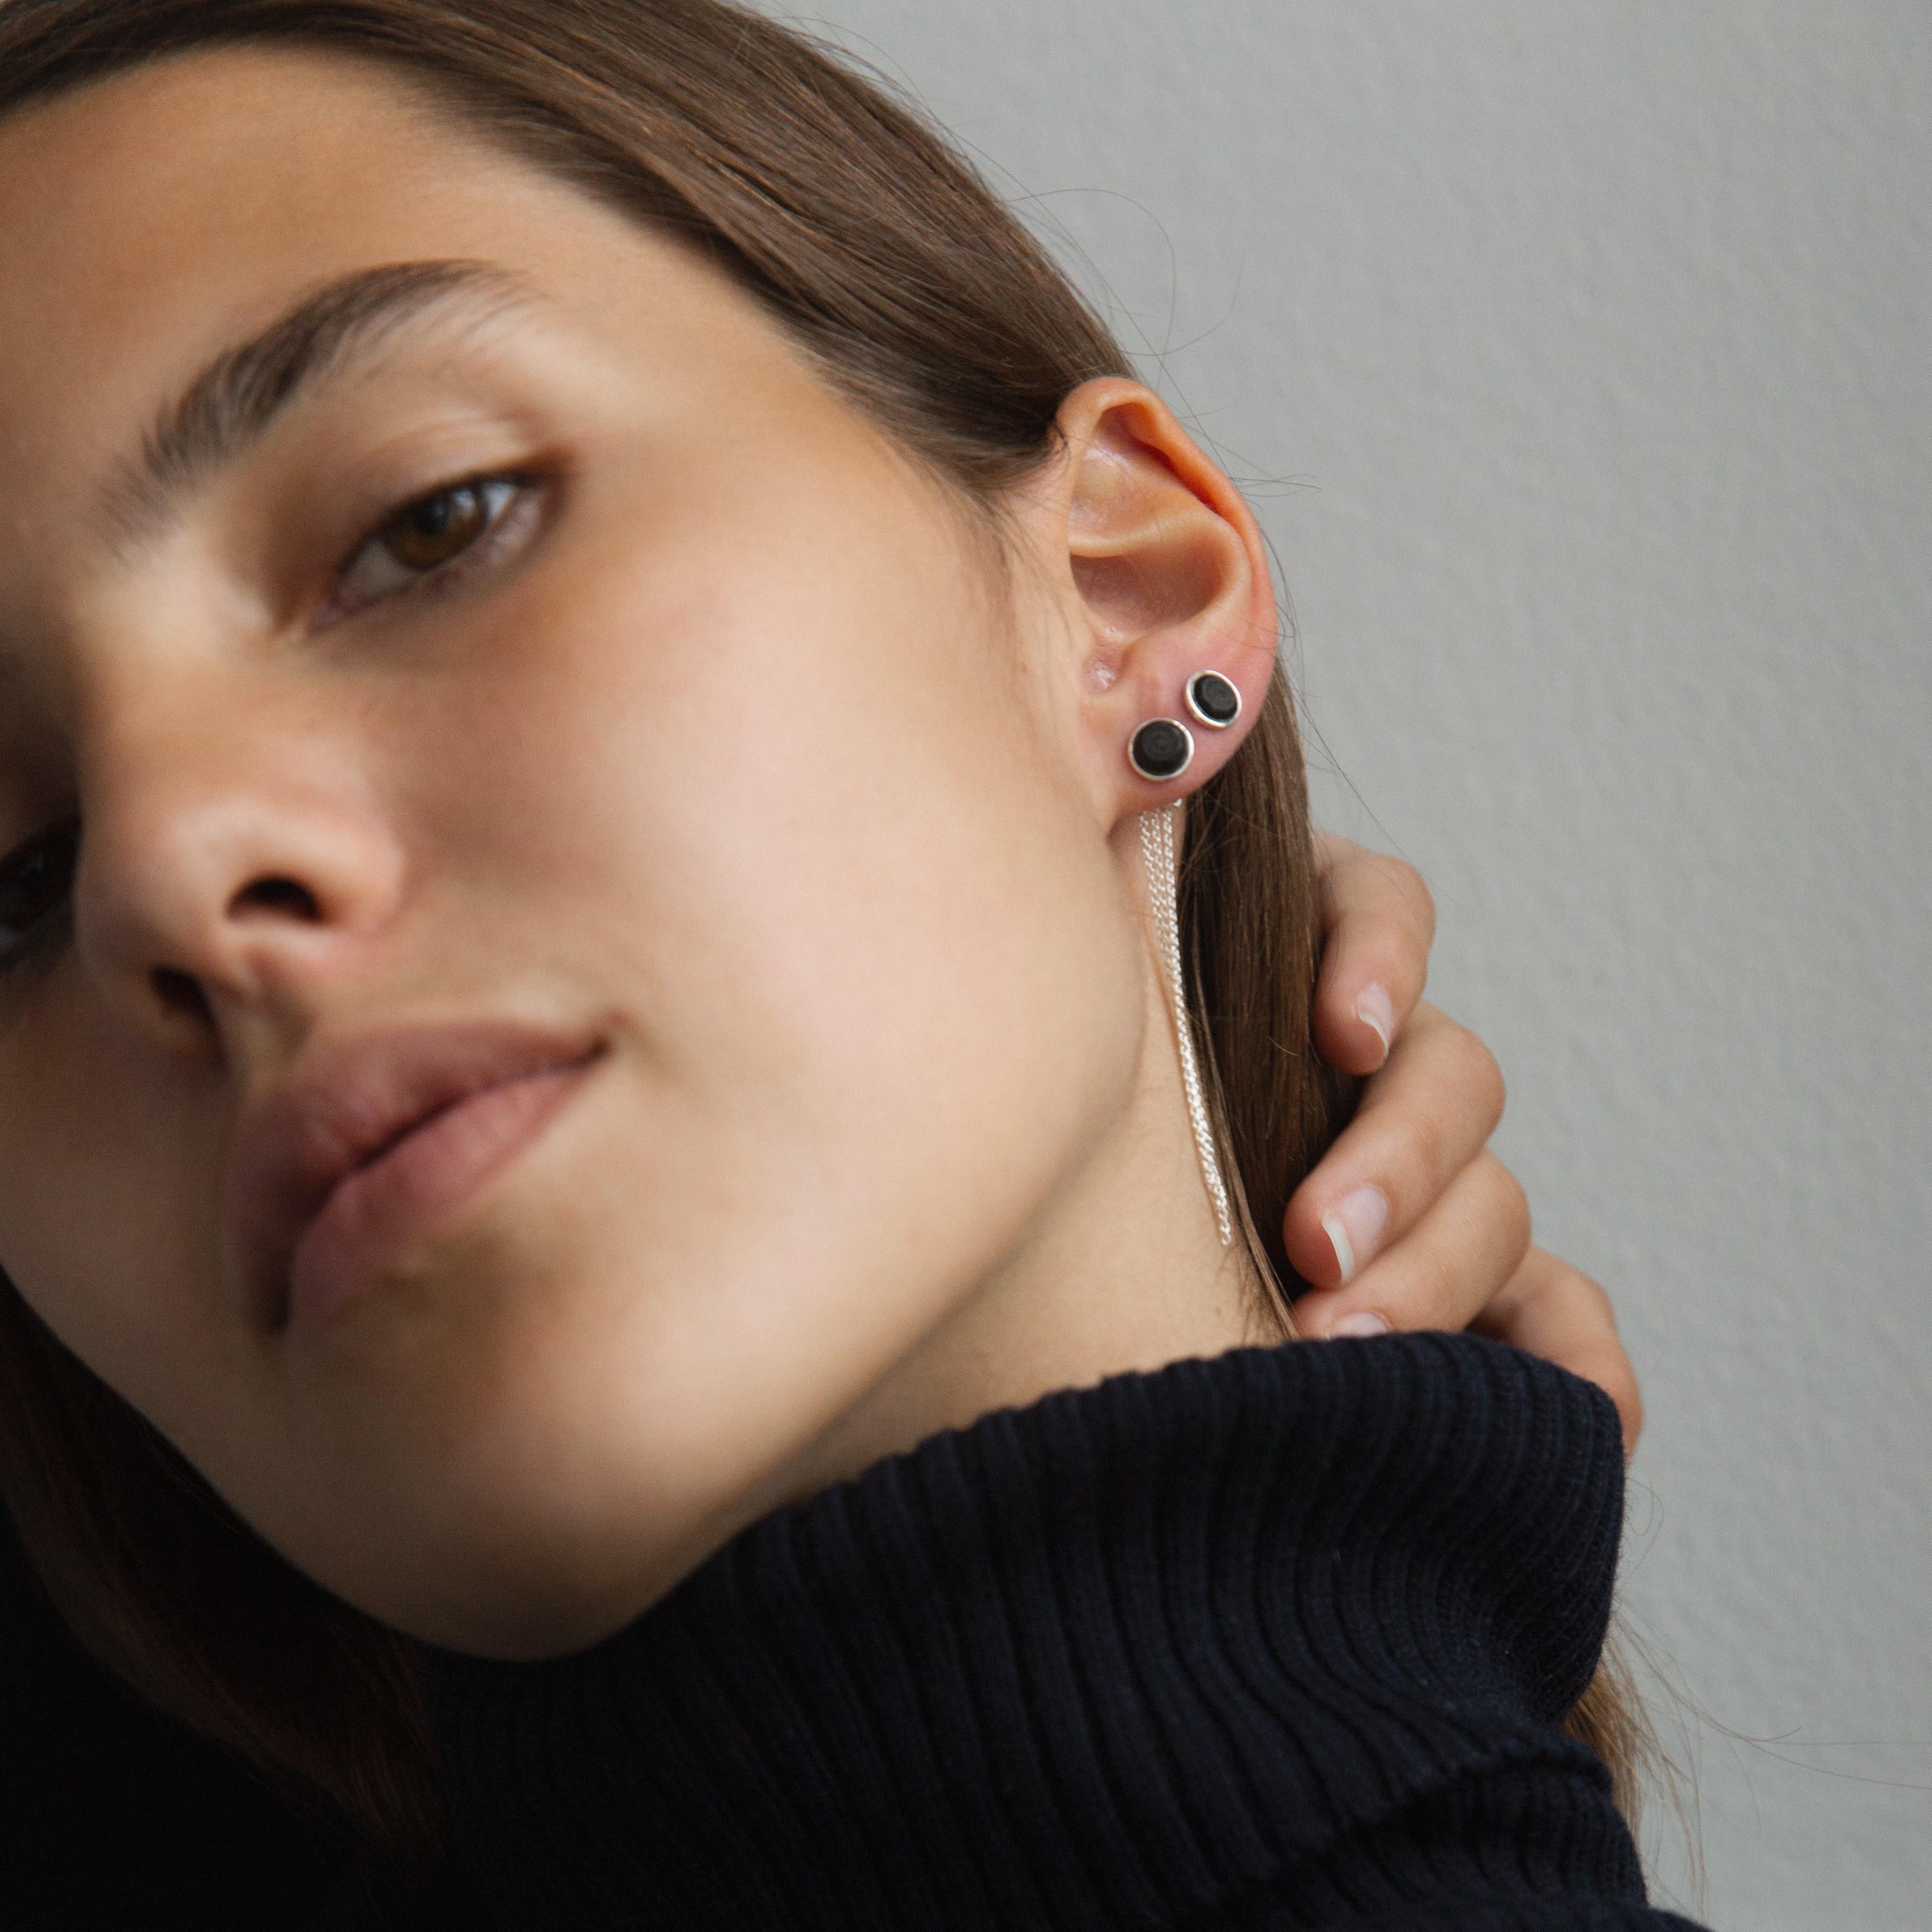 Also available in recycled 18k gold and as a pair.

This one piece earring is handcrafted from recycled sterling silver, ensuring our jewelry is as clean and durable as possible. The sustainable and brilliant-cut Mpingo Blackwood diamond is the